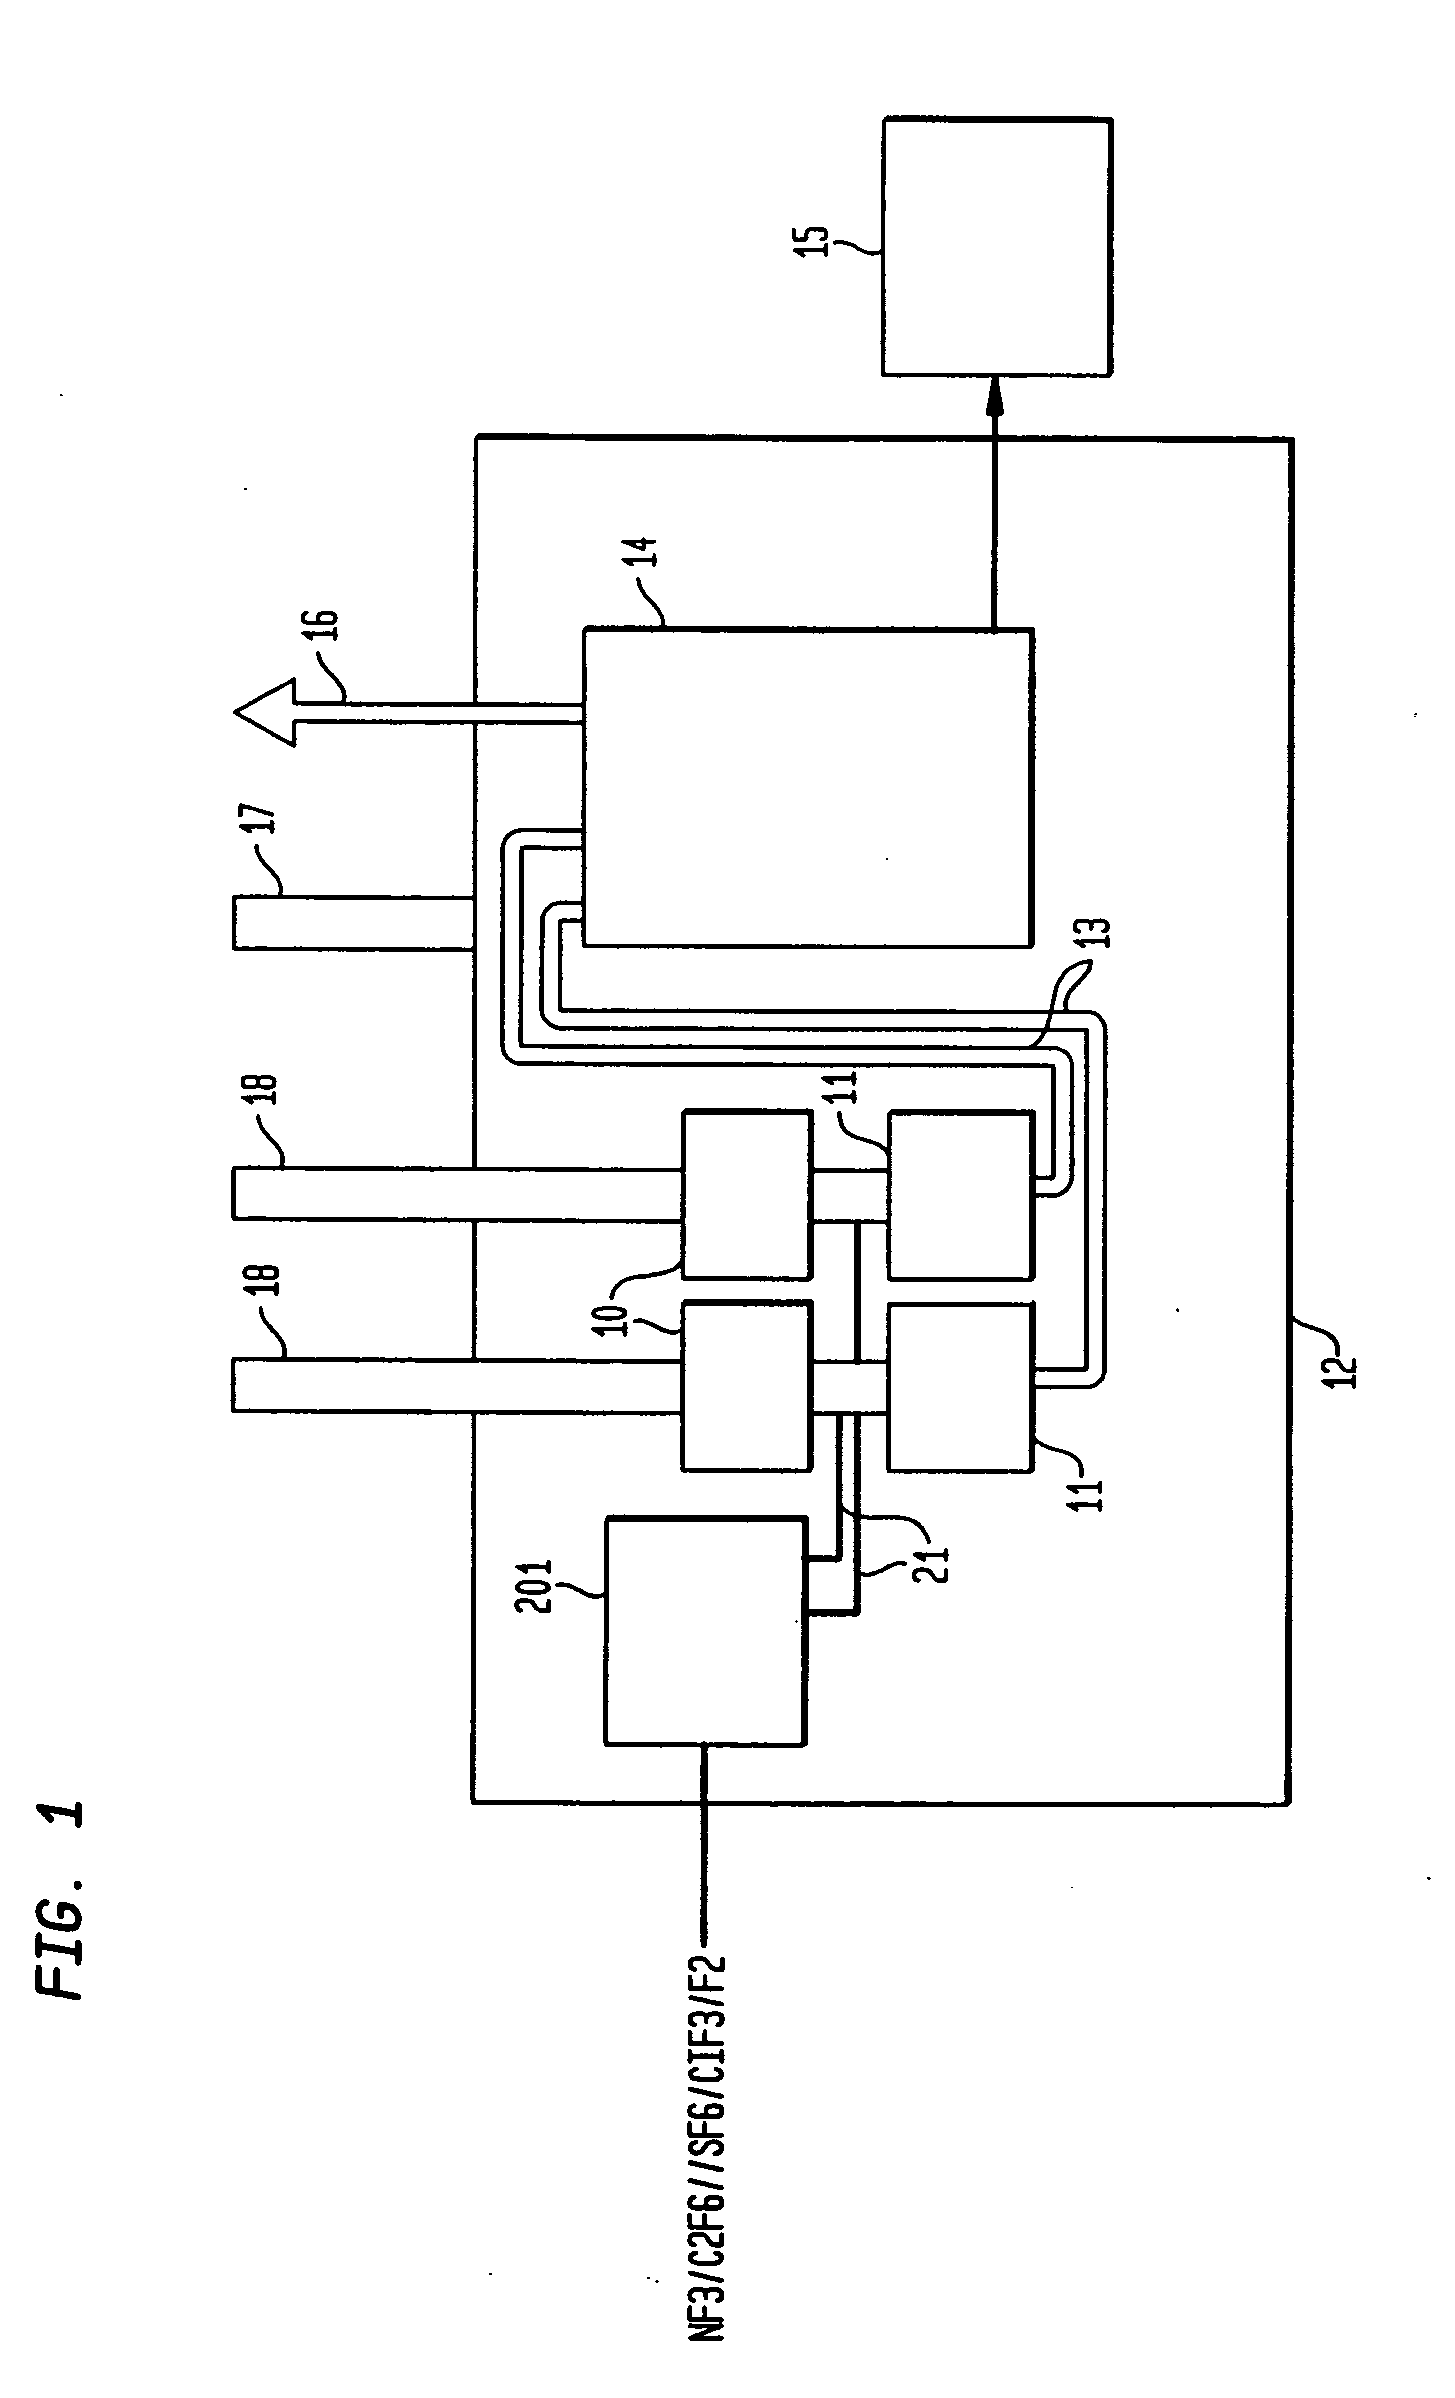 Method and apparatus for maintaining by-product volatility in deposition process